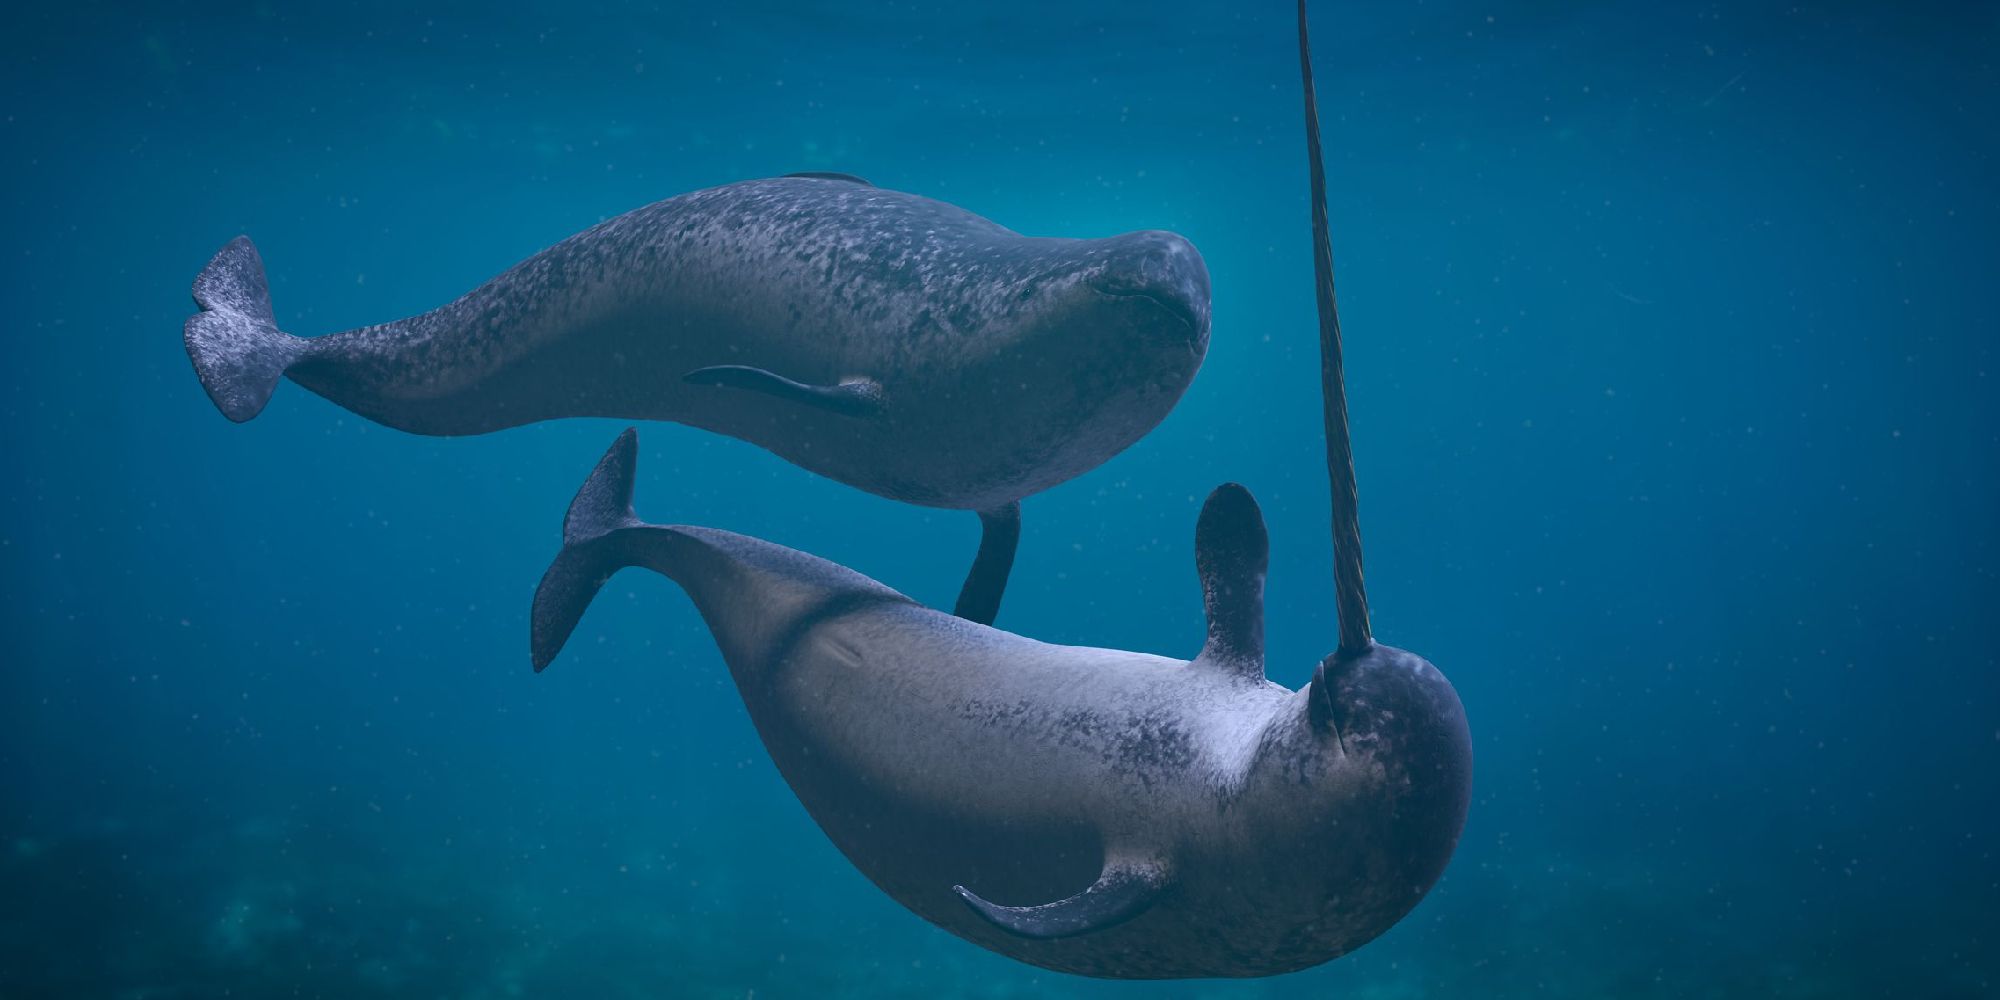 A narwhal swimming near another whale, almost touching it with its tusk